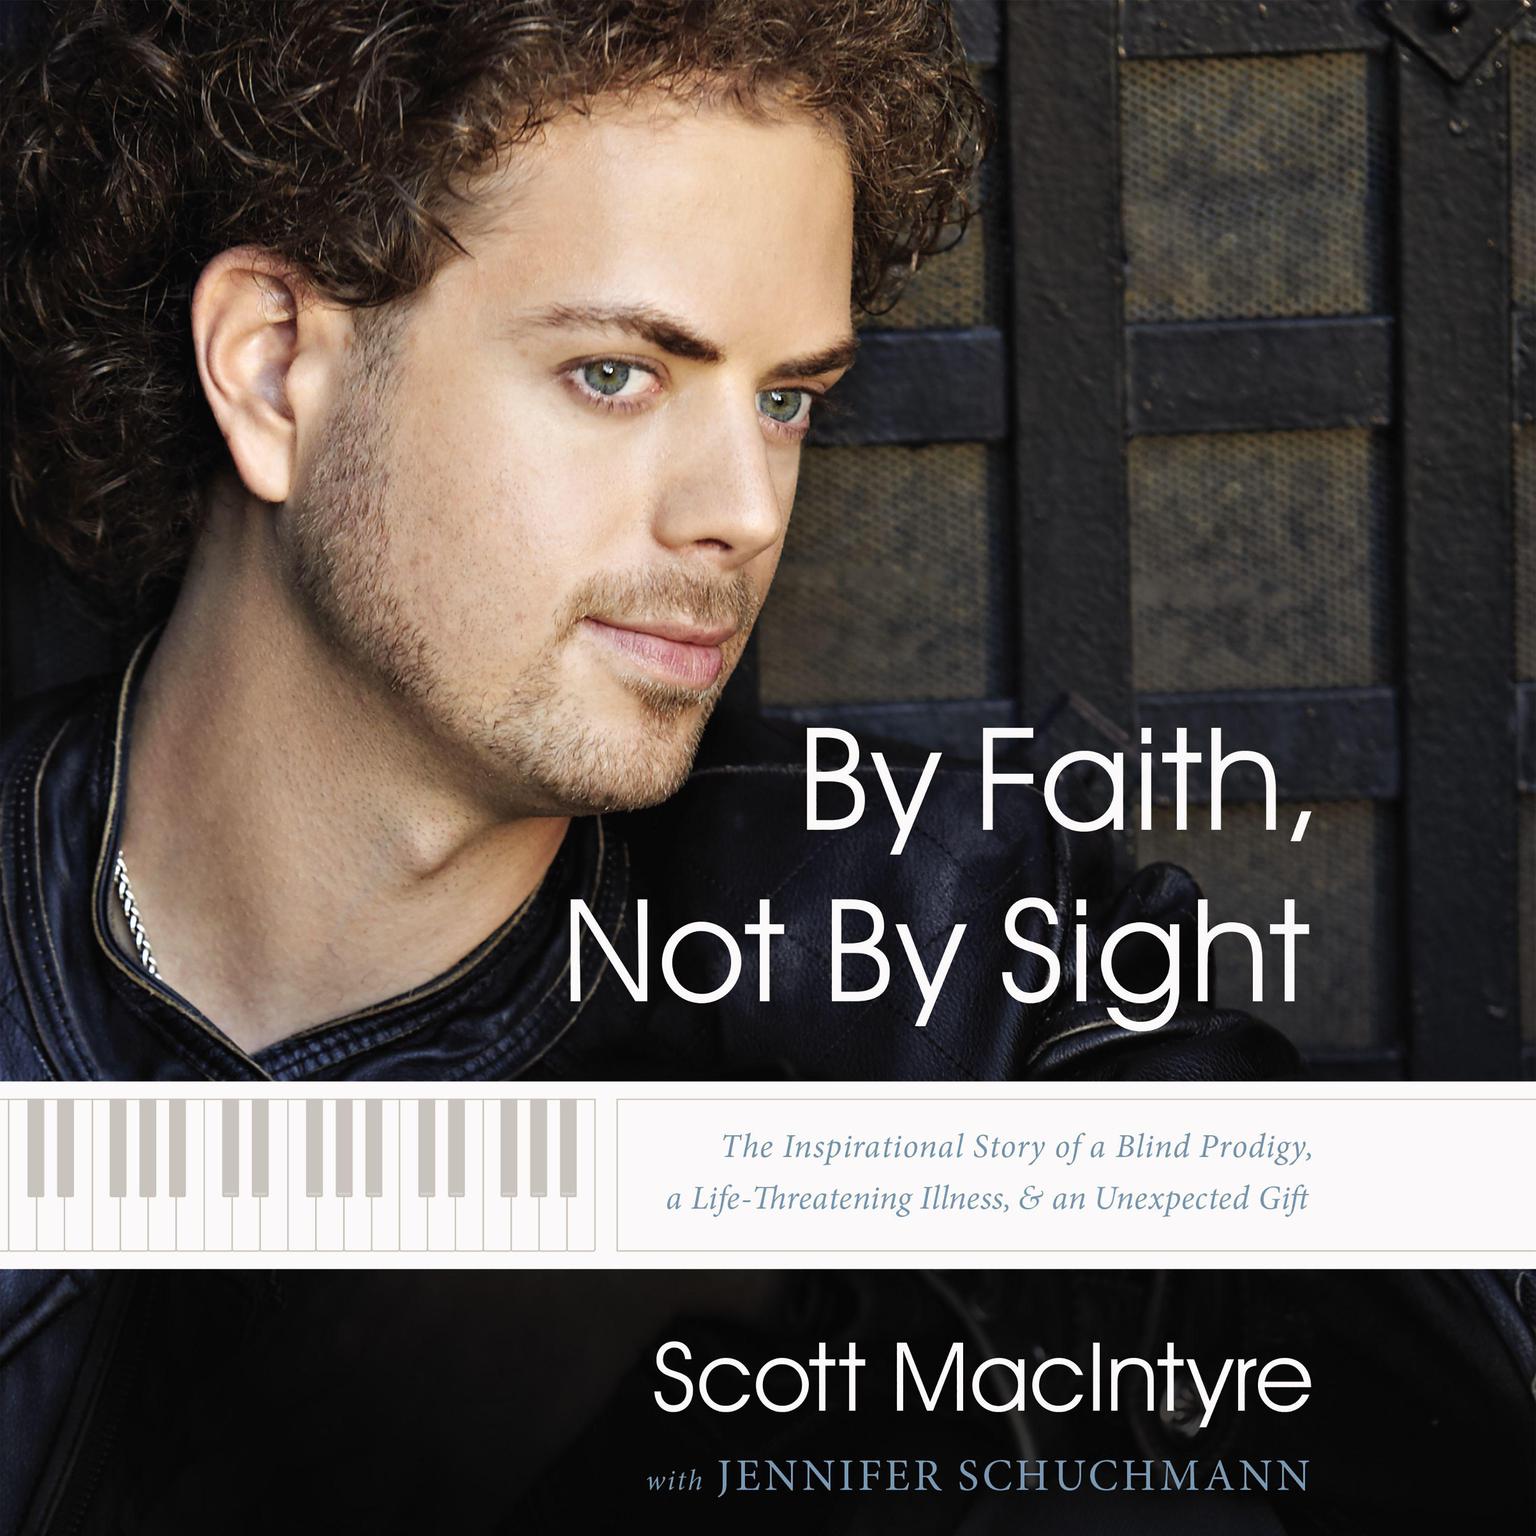 By Faith, Not By Sight: The Inspirational Story of a Blind Prodigy, a Life-Threatening Illness, and an Unexpected Gift Audiobook, by Scott MacIntyre